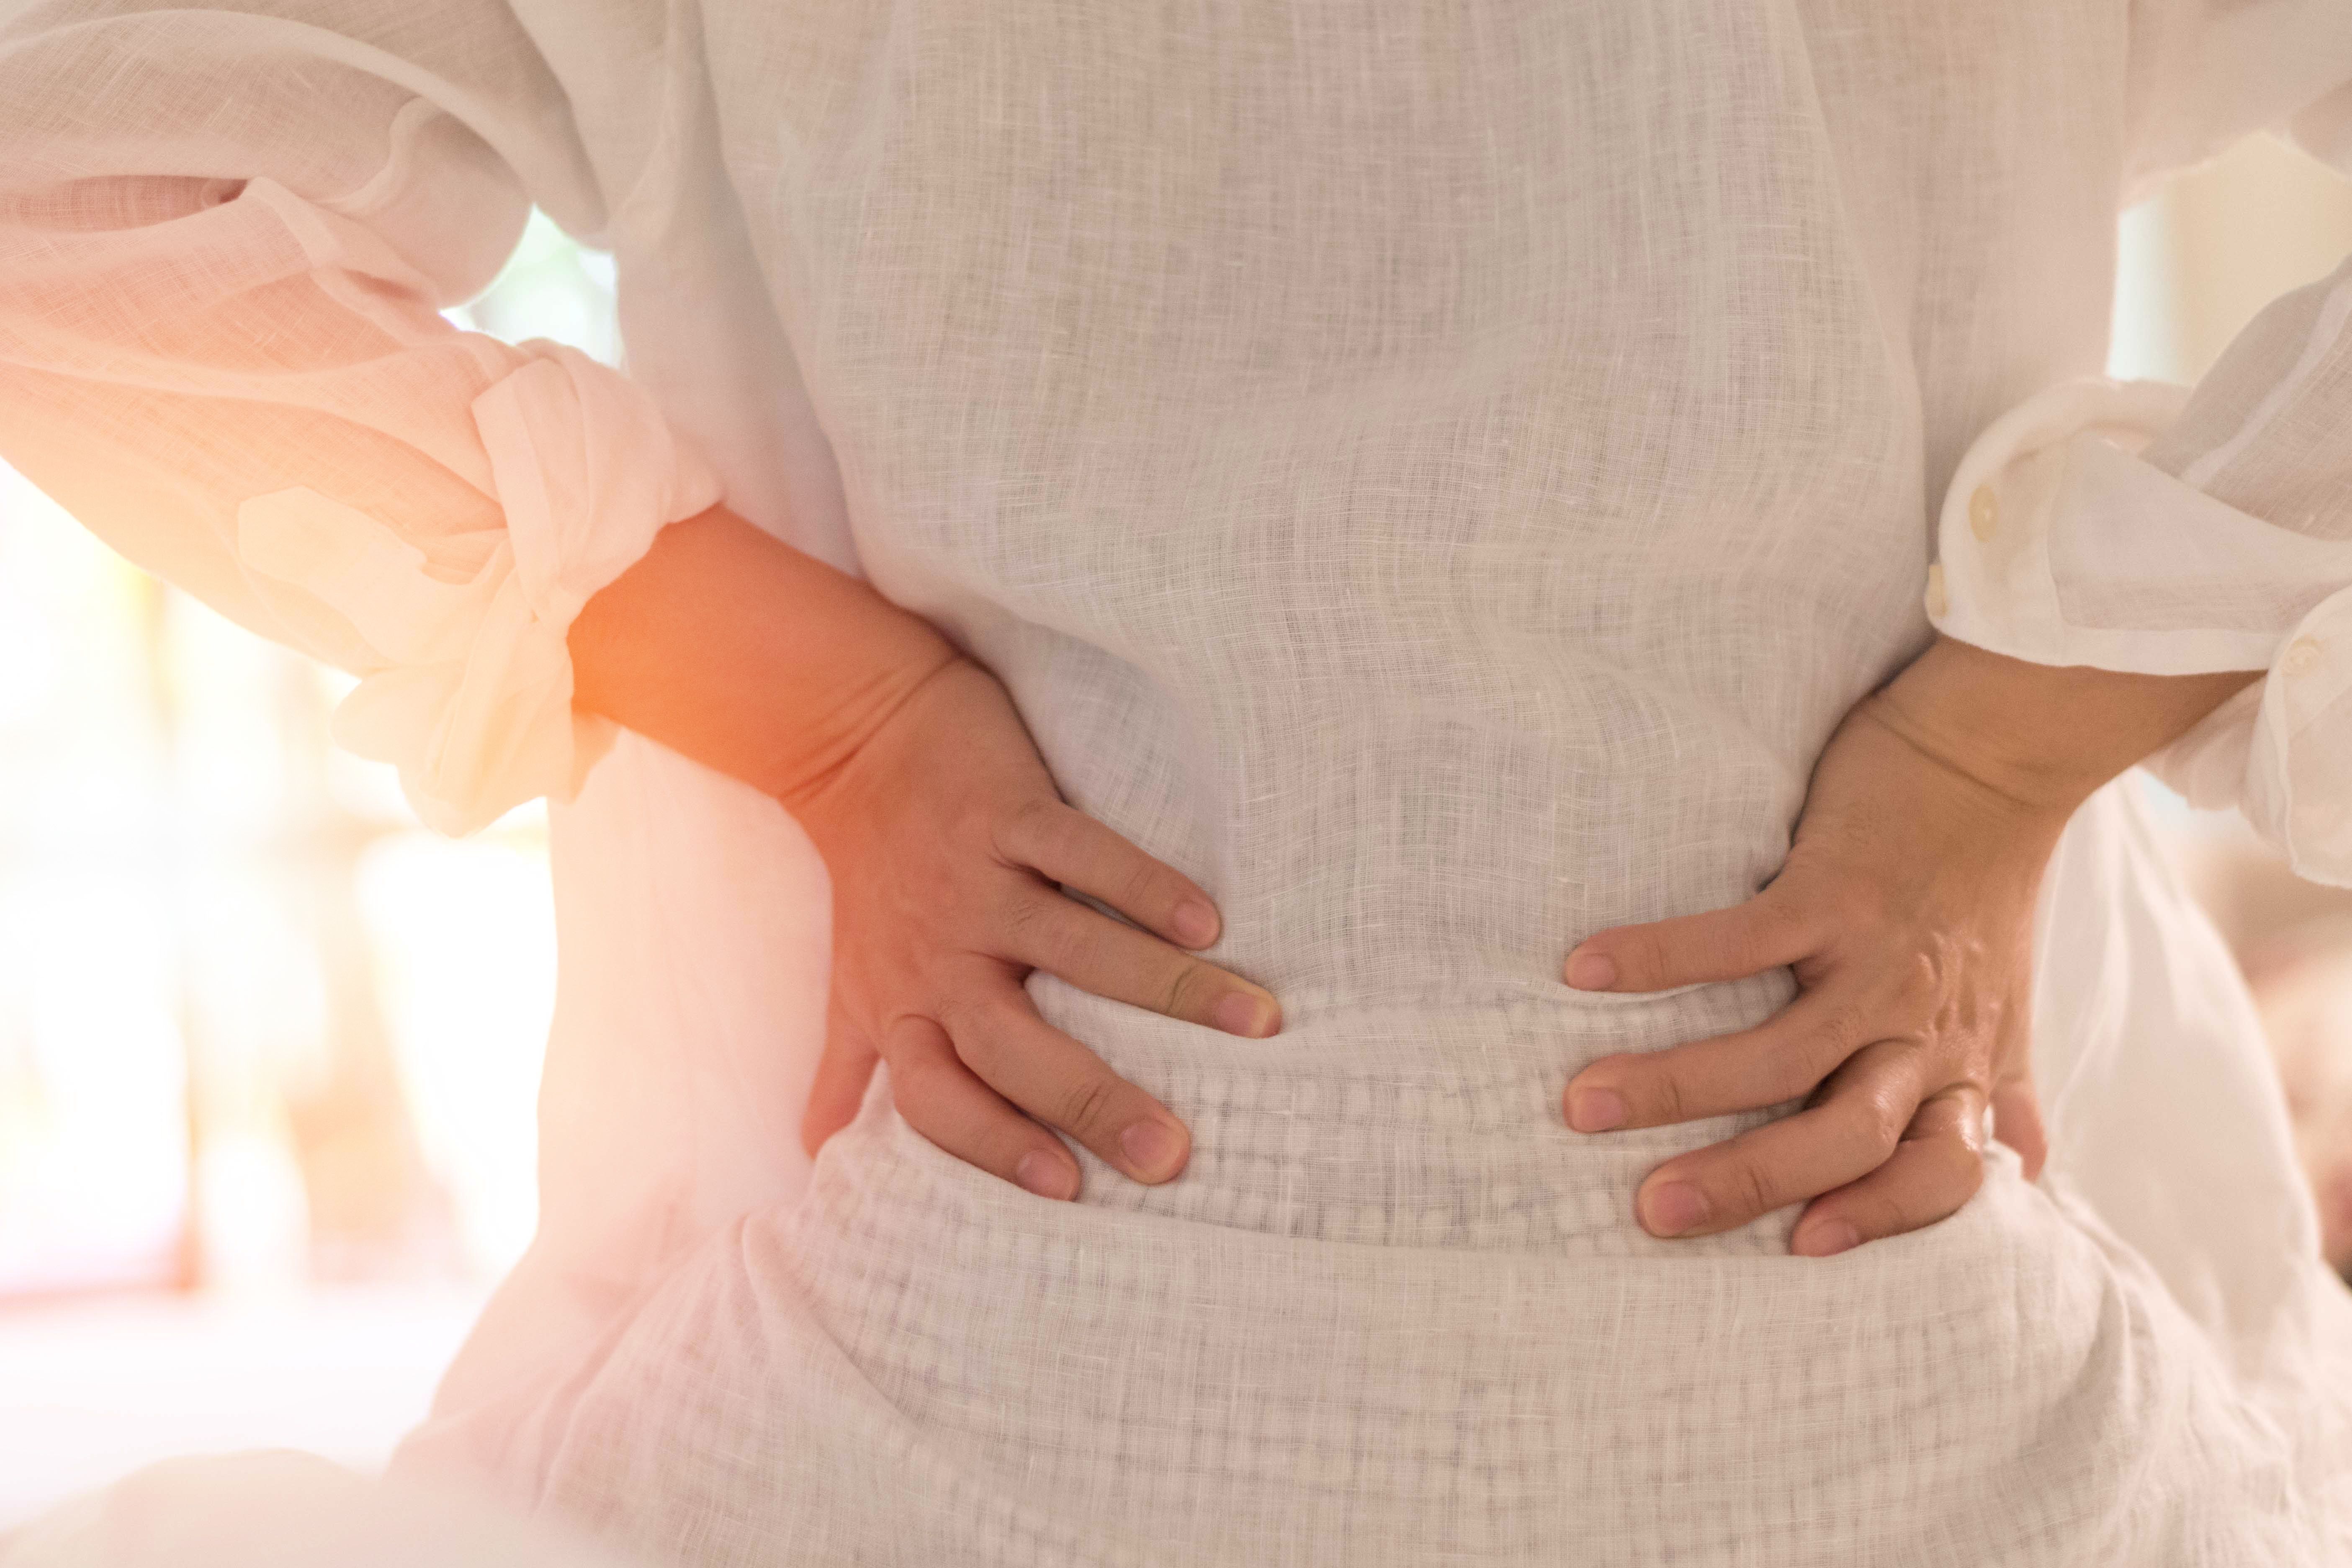 Is it axSpA or just a simple case of pelvic pain?